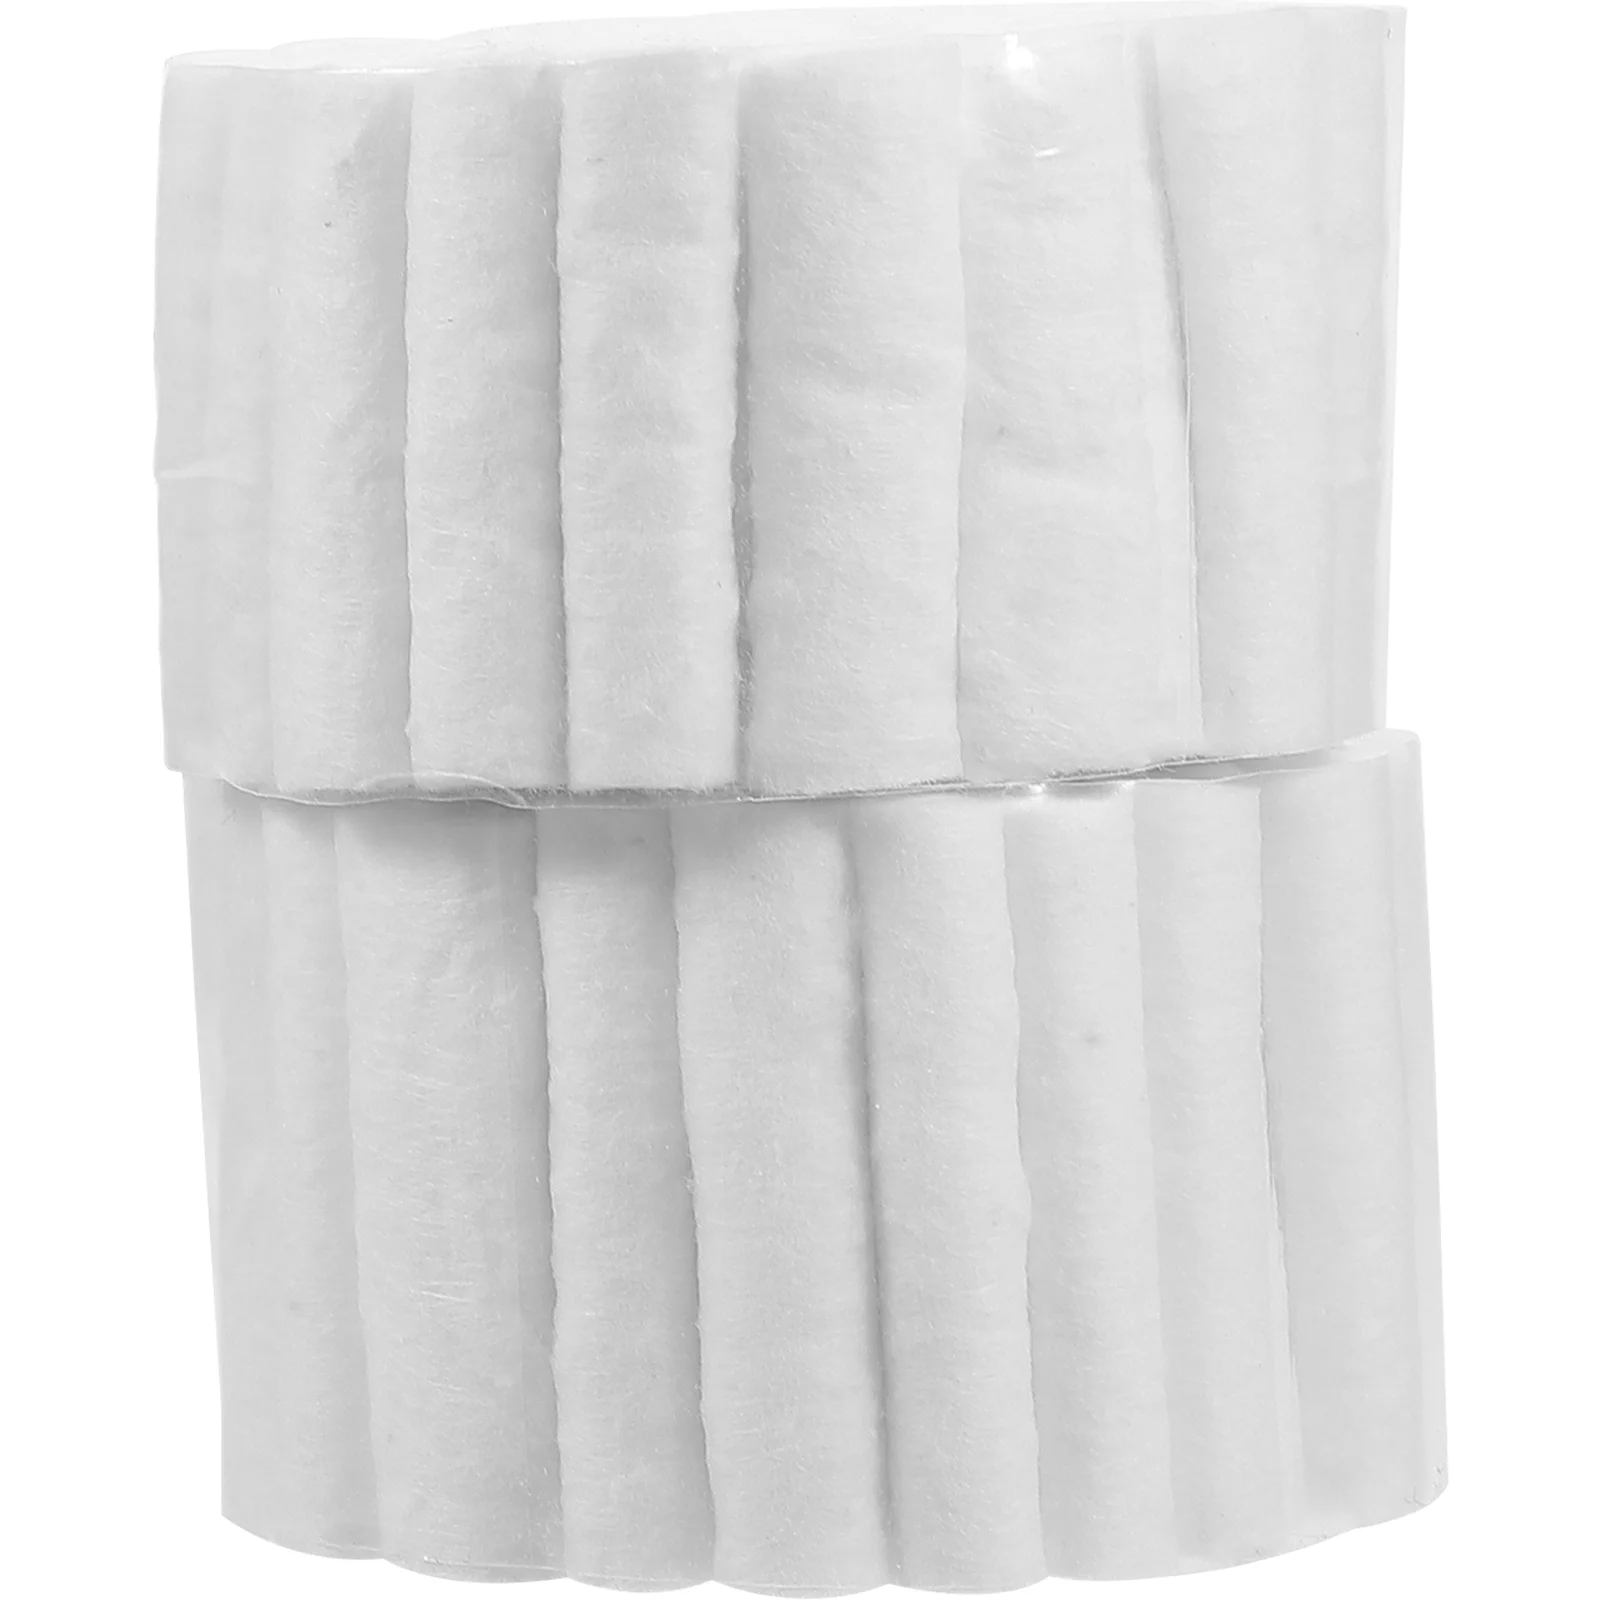 

250pcs Cotton Nose Bleed Plugs Extra Absorbent Blood Clotting Cotton Rolls